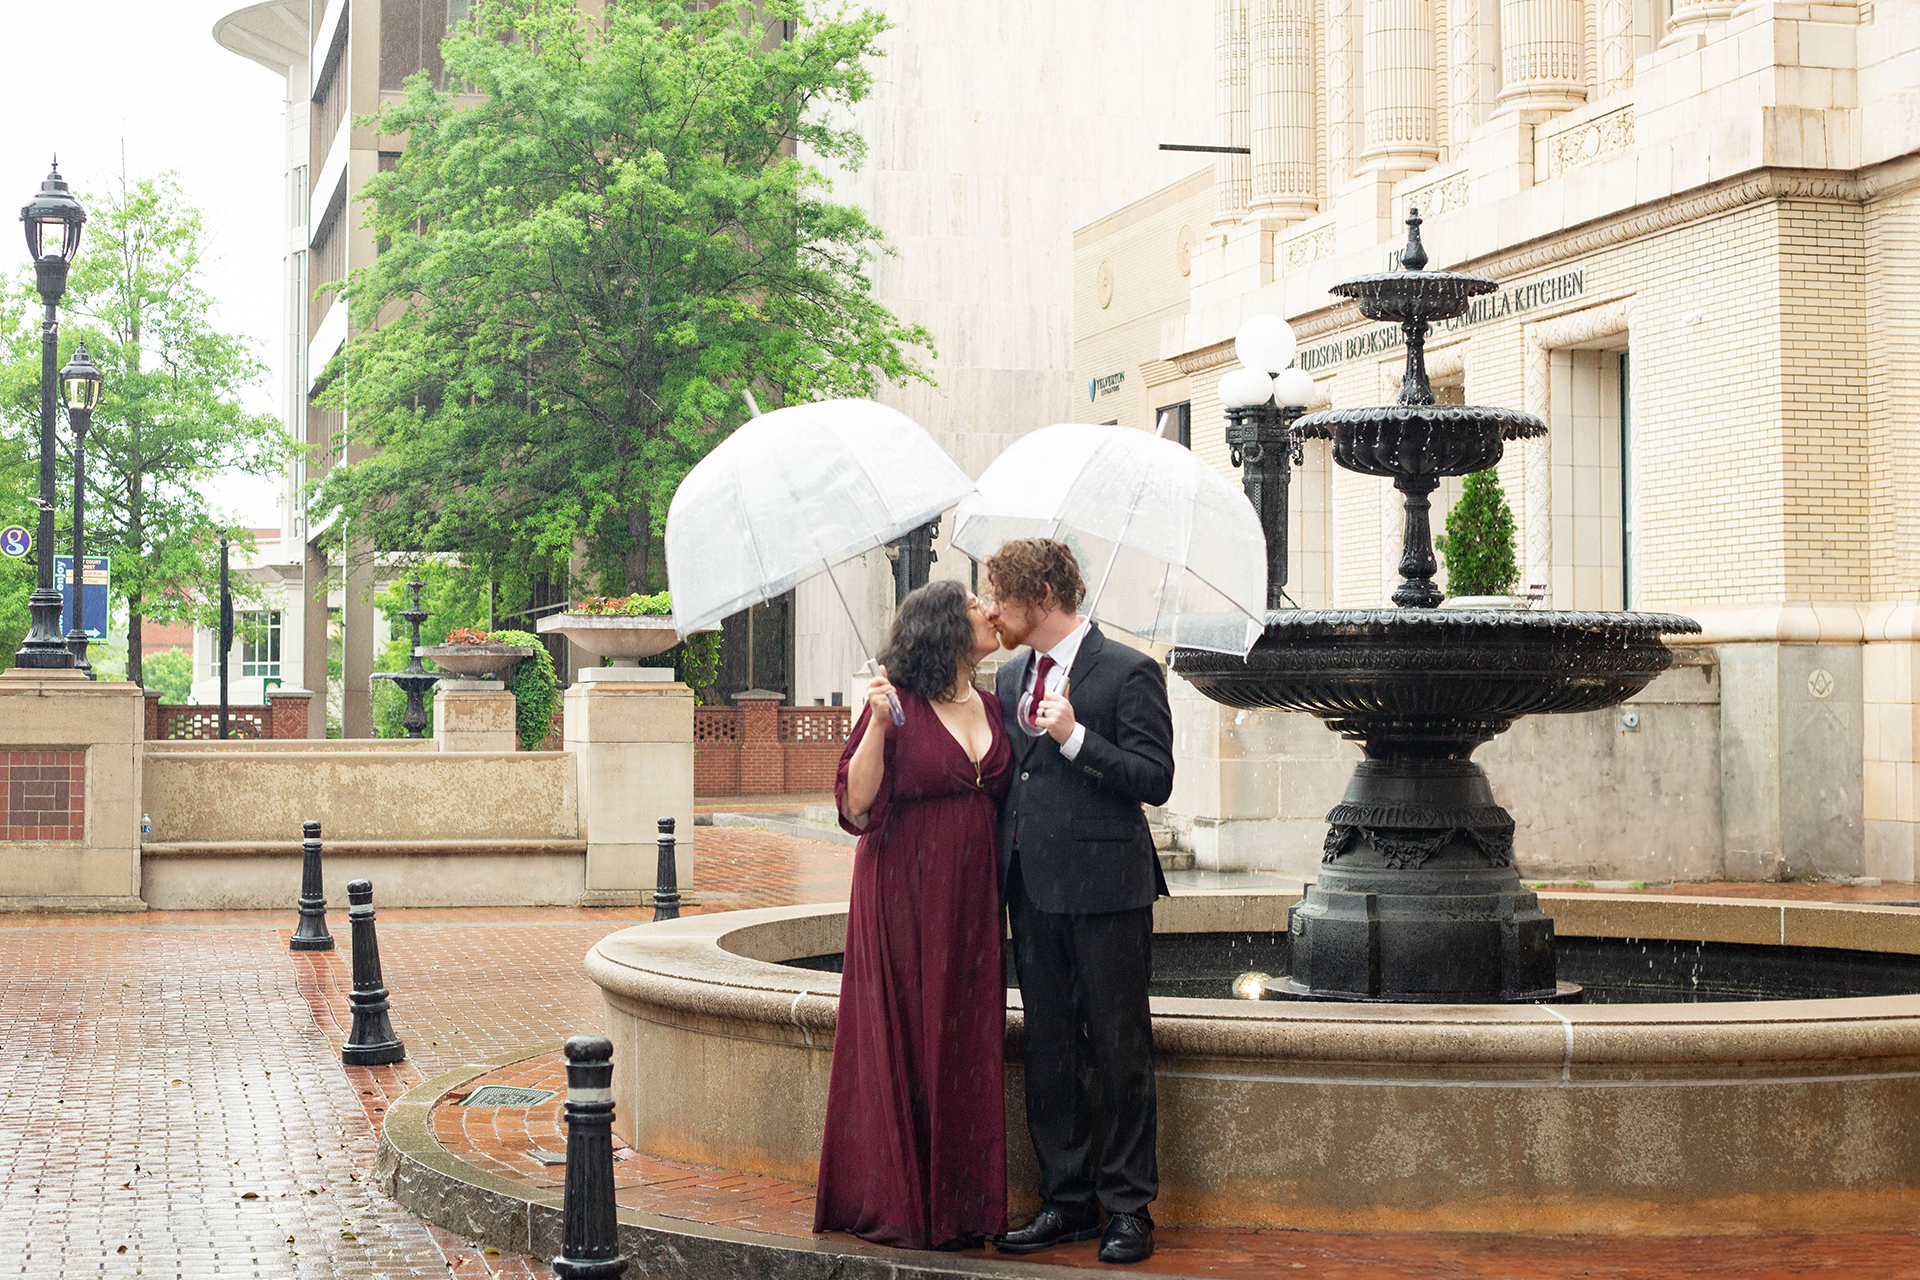 Elope in downtown Greenville, SC | Christine Scott Photography